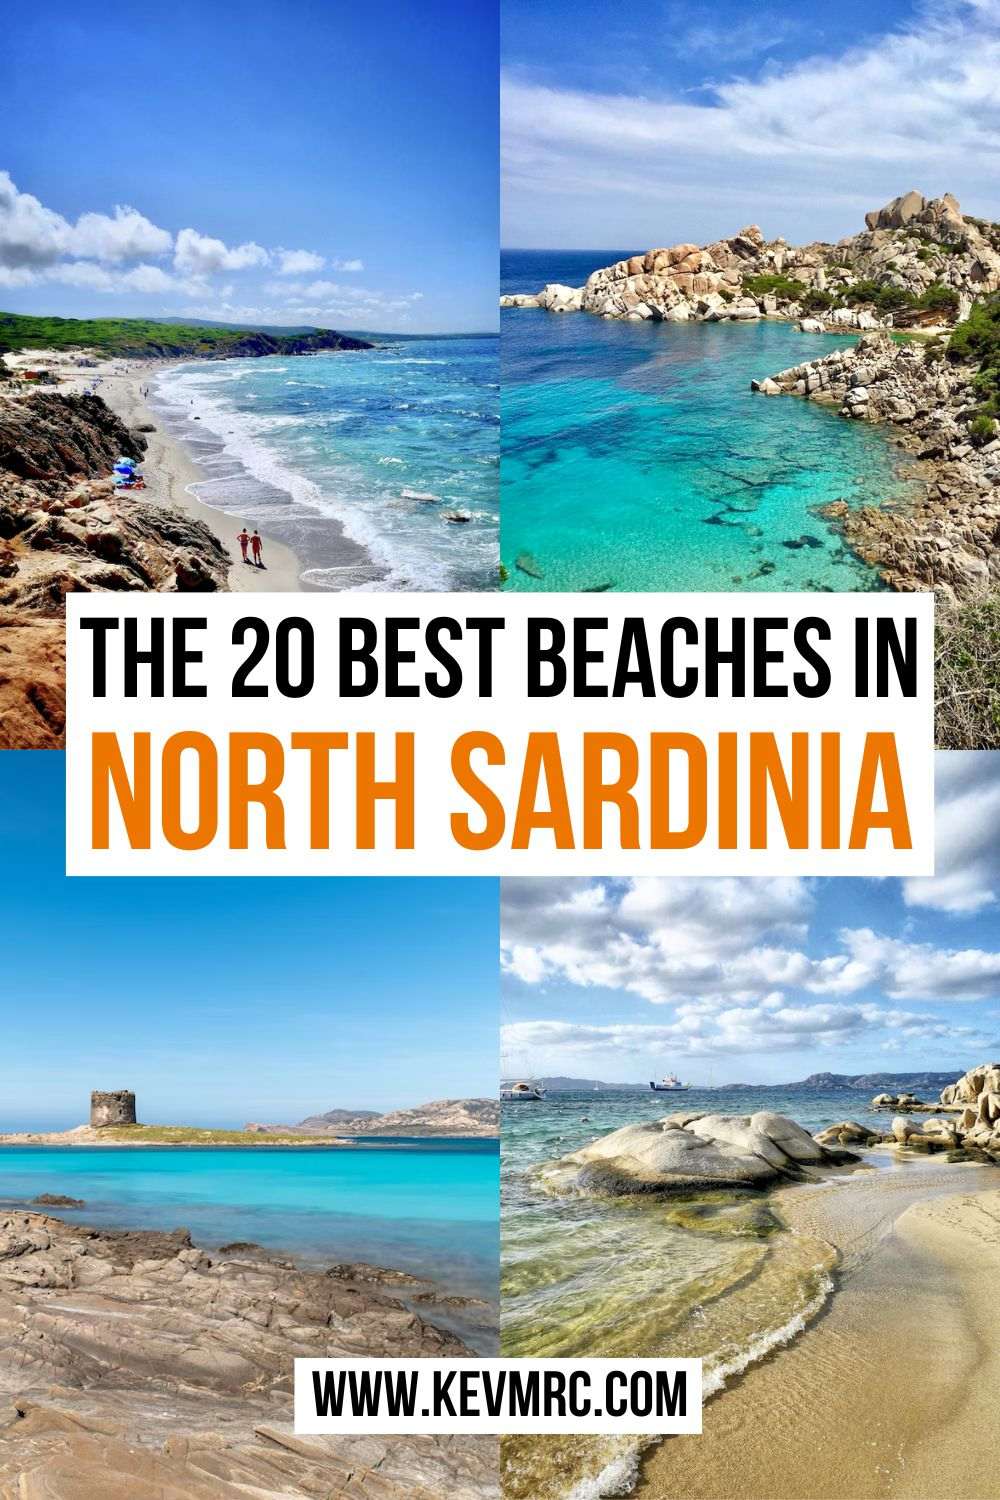 Sardinia is widely known for its incredibly beautiful beaches. If you are traveling the north of the island, discover in this post the 20 best beaches in northern Sardinia, with a free map to find them easily. best sardinia beaches | sardinia beach | north sardinia beaches | sardinia beaches map | sardinia italy beaches #sardiniabeaches #northsardinia